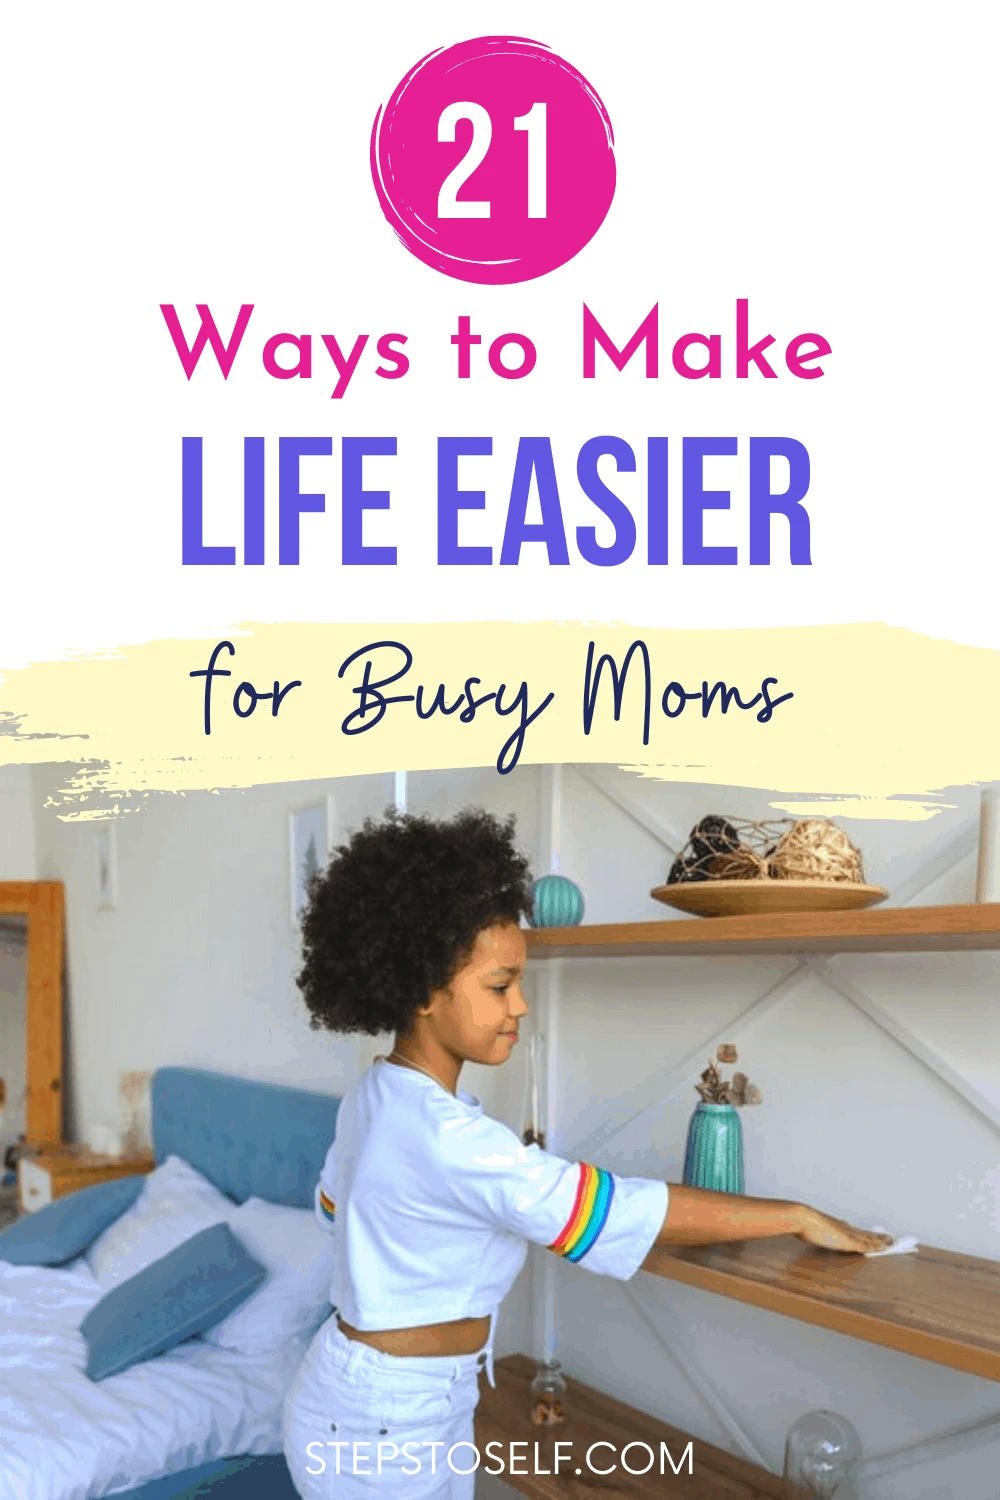 5 Routines to Make Working Mom Life Easier